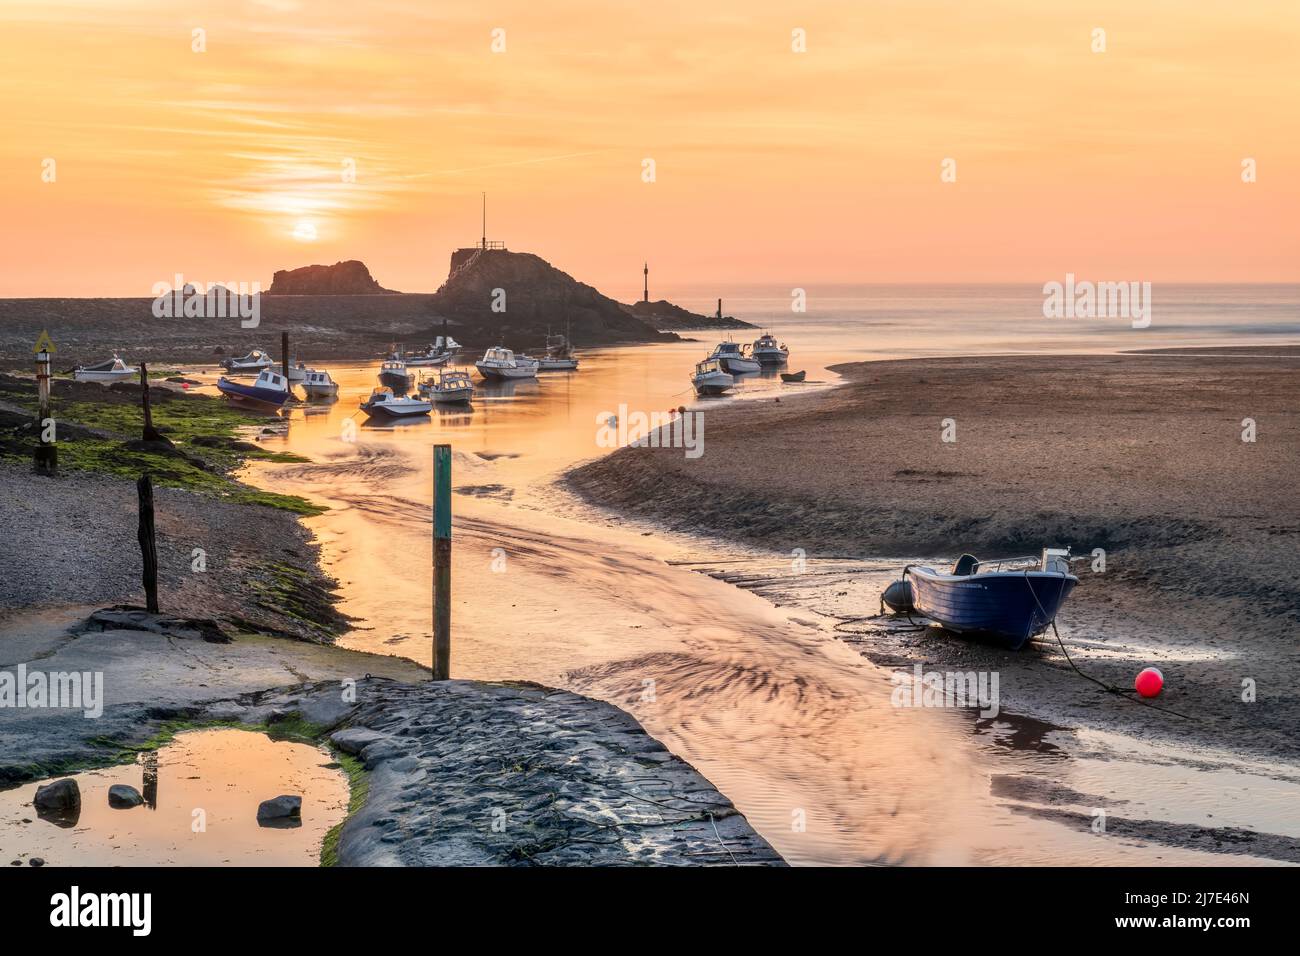 A hazy end to the day as the sun sets over the picturesque breakwater at Bude in North East Cornwall. Stock Photo